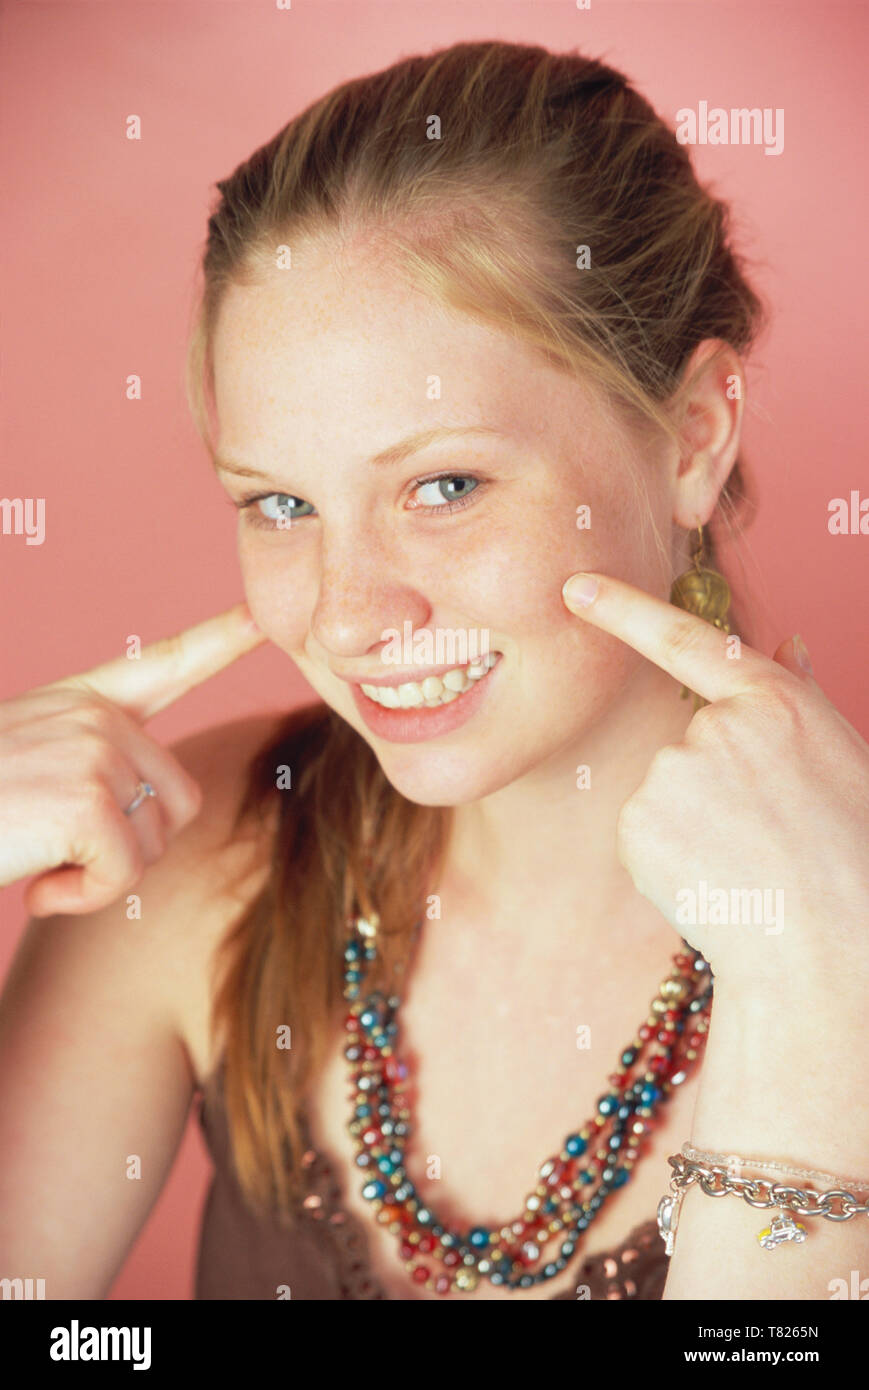 Cute Teenage Girl Pointing to her Dimples with  a big smile, USA Stock Photo